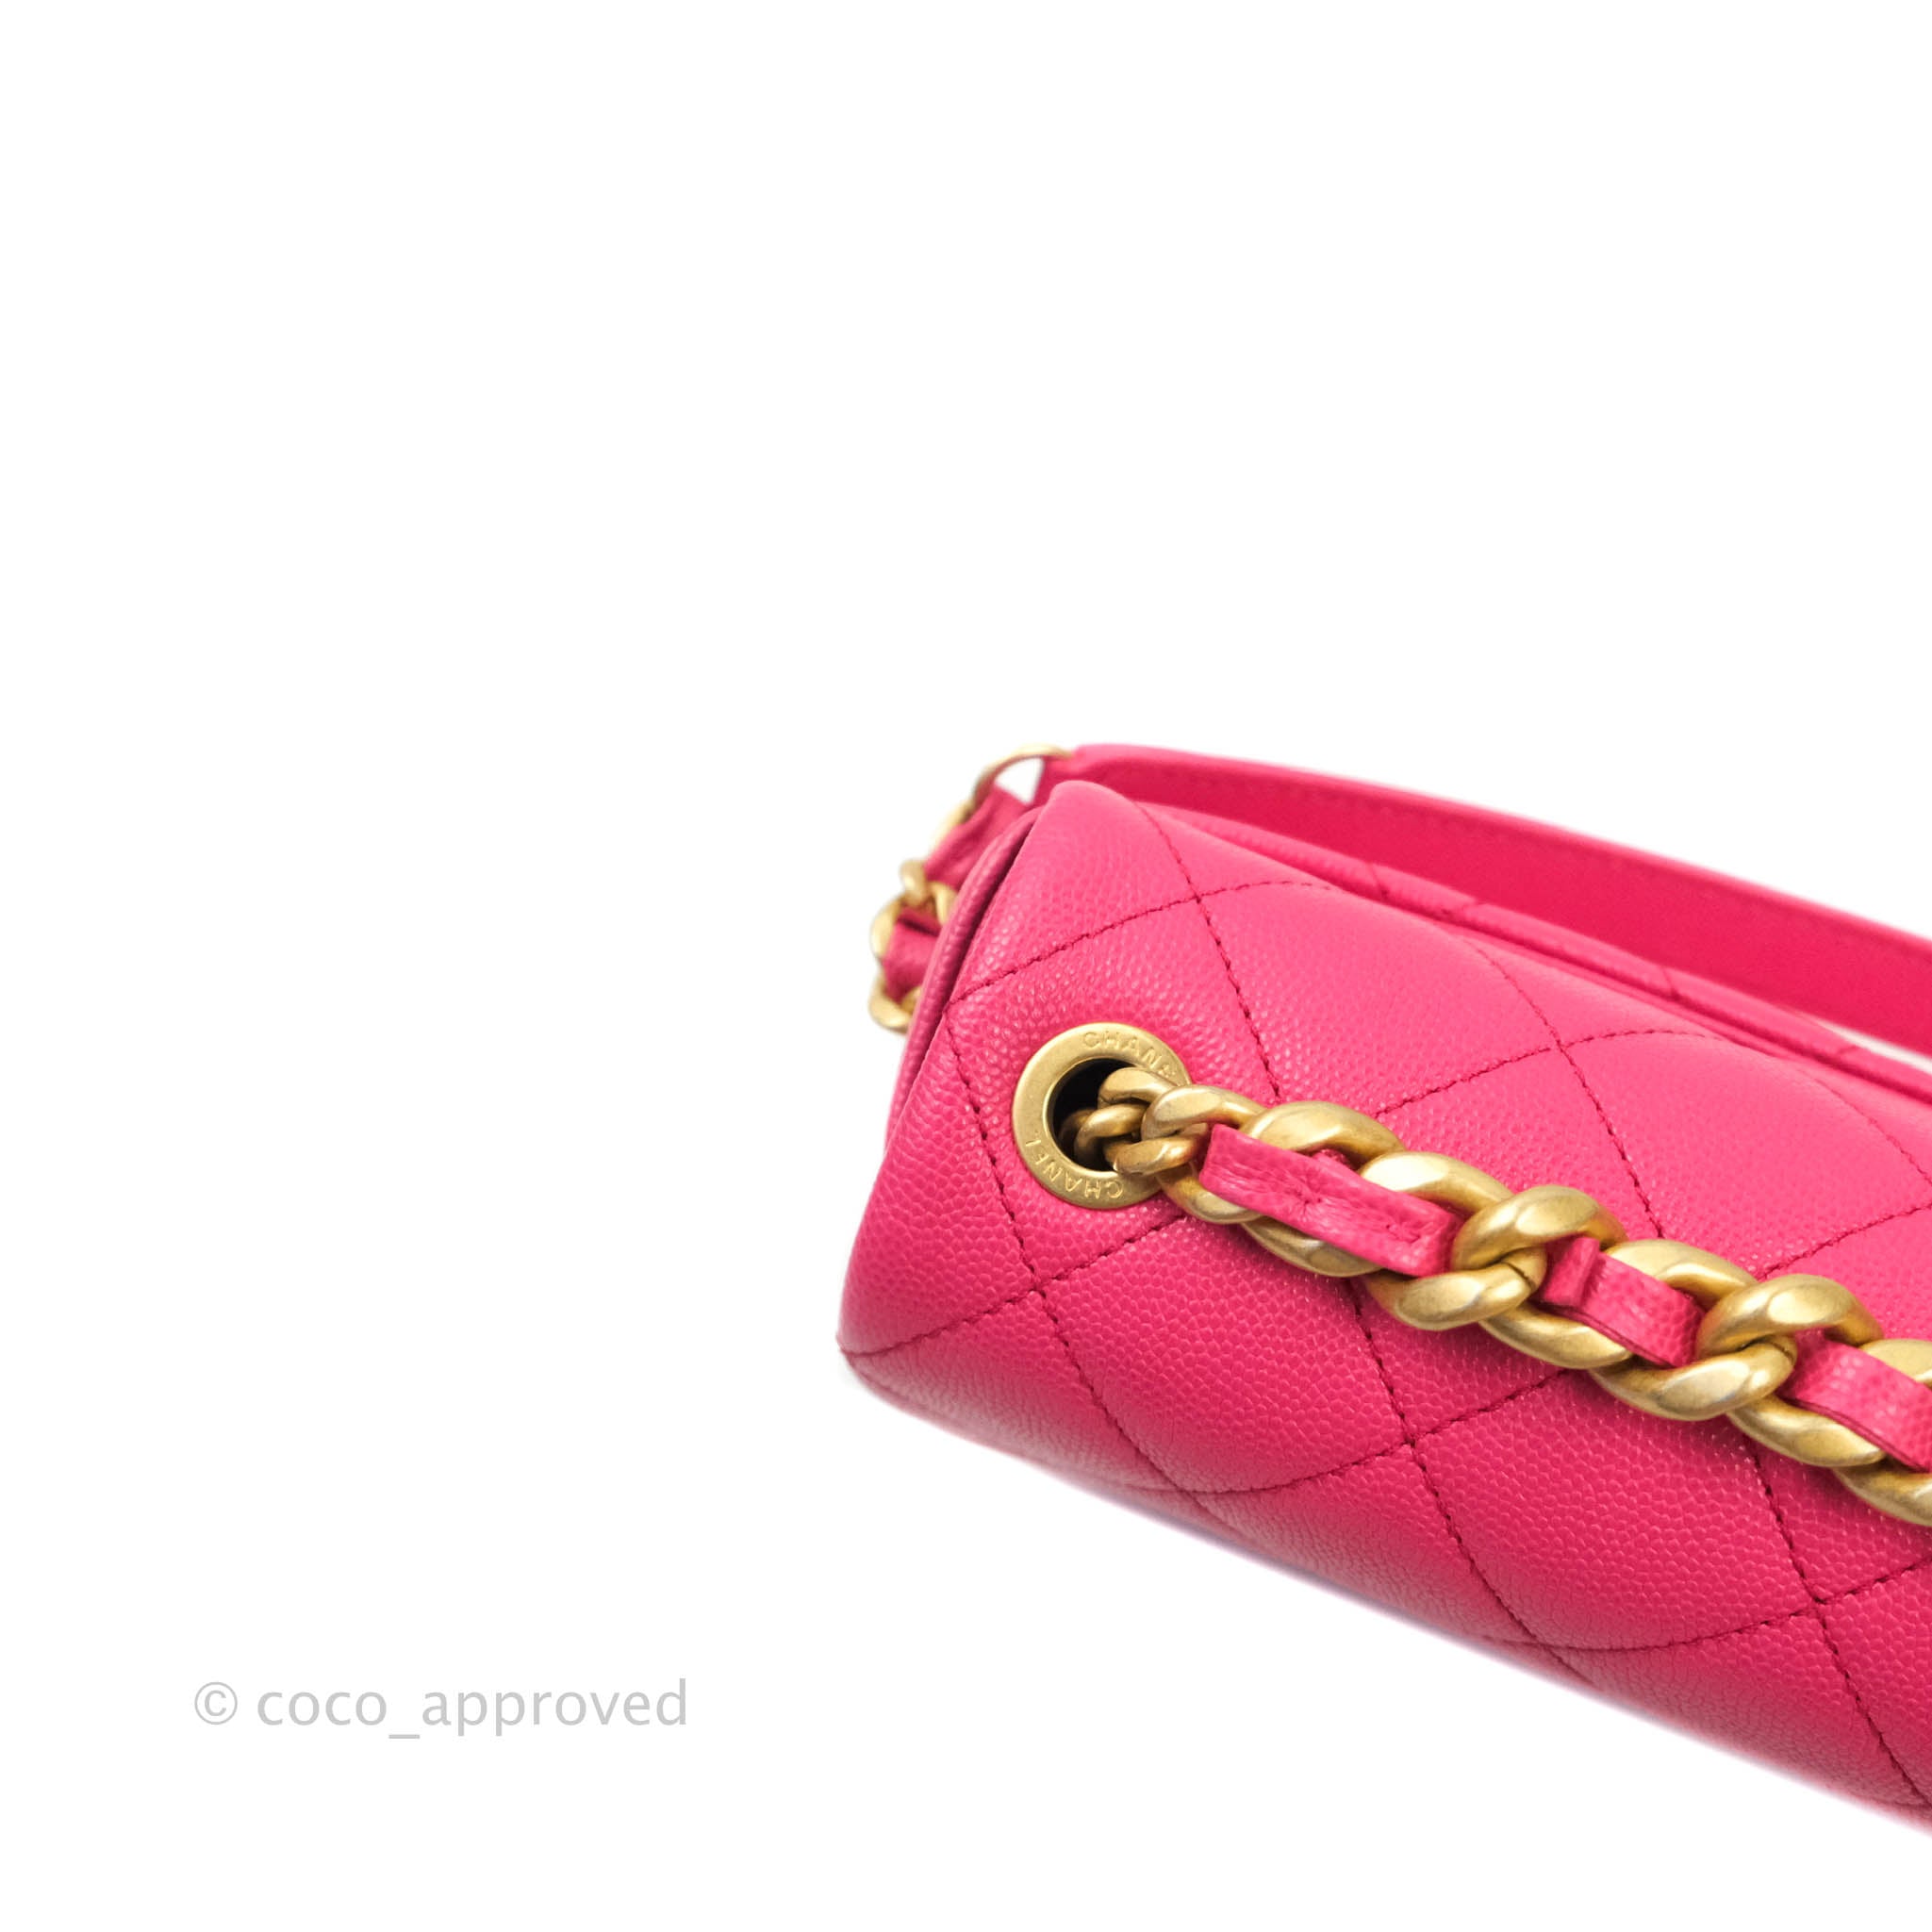 Chanel Fashion Therapy Flap Bag Hot Pink Caviar Gold Hardware